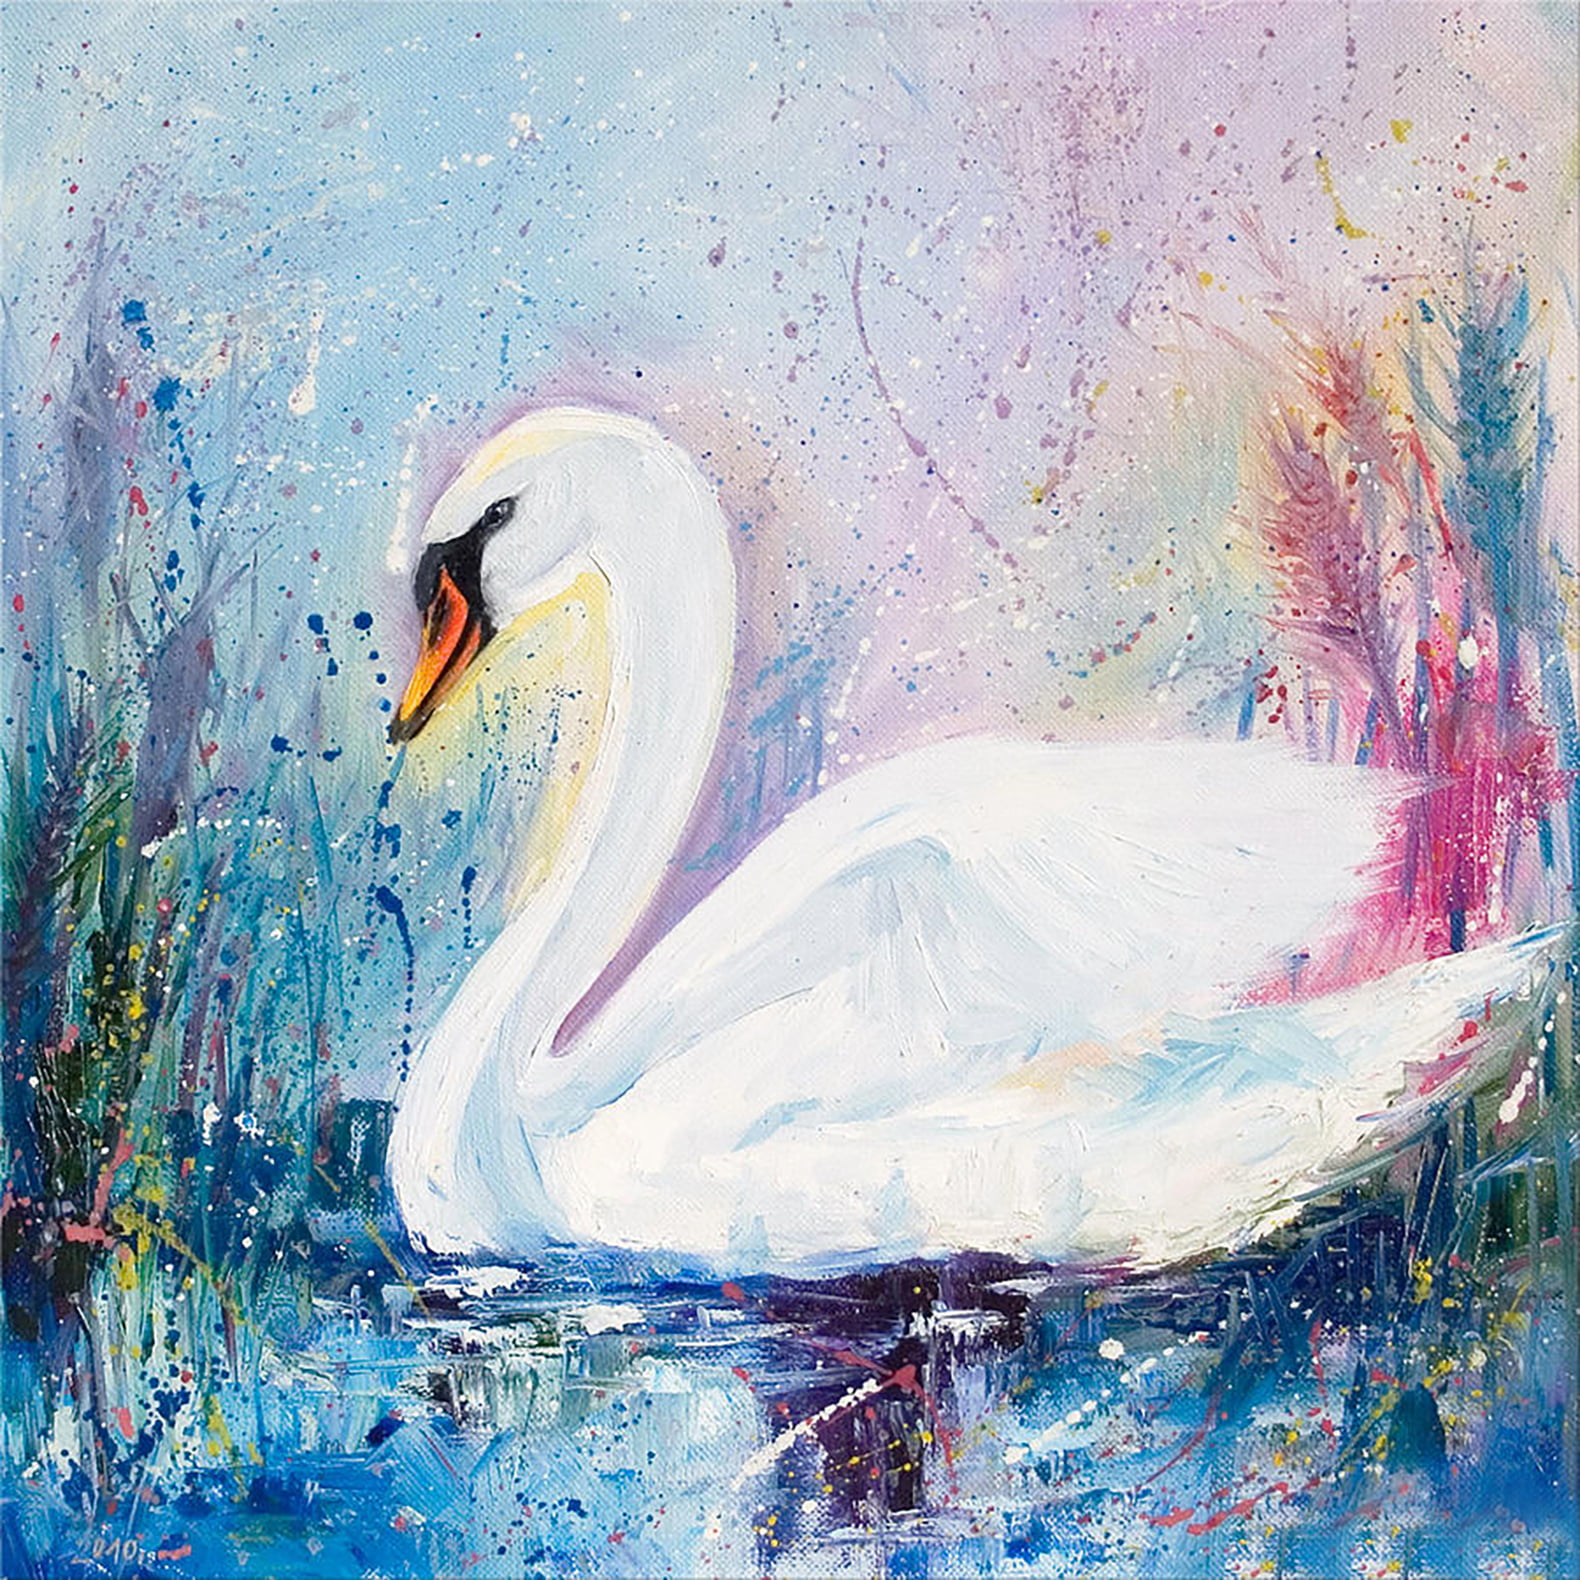 Car Tower Swan 5D Diamond Painting Embroidery Cross Stitch Picture Art Handmade